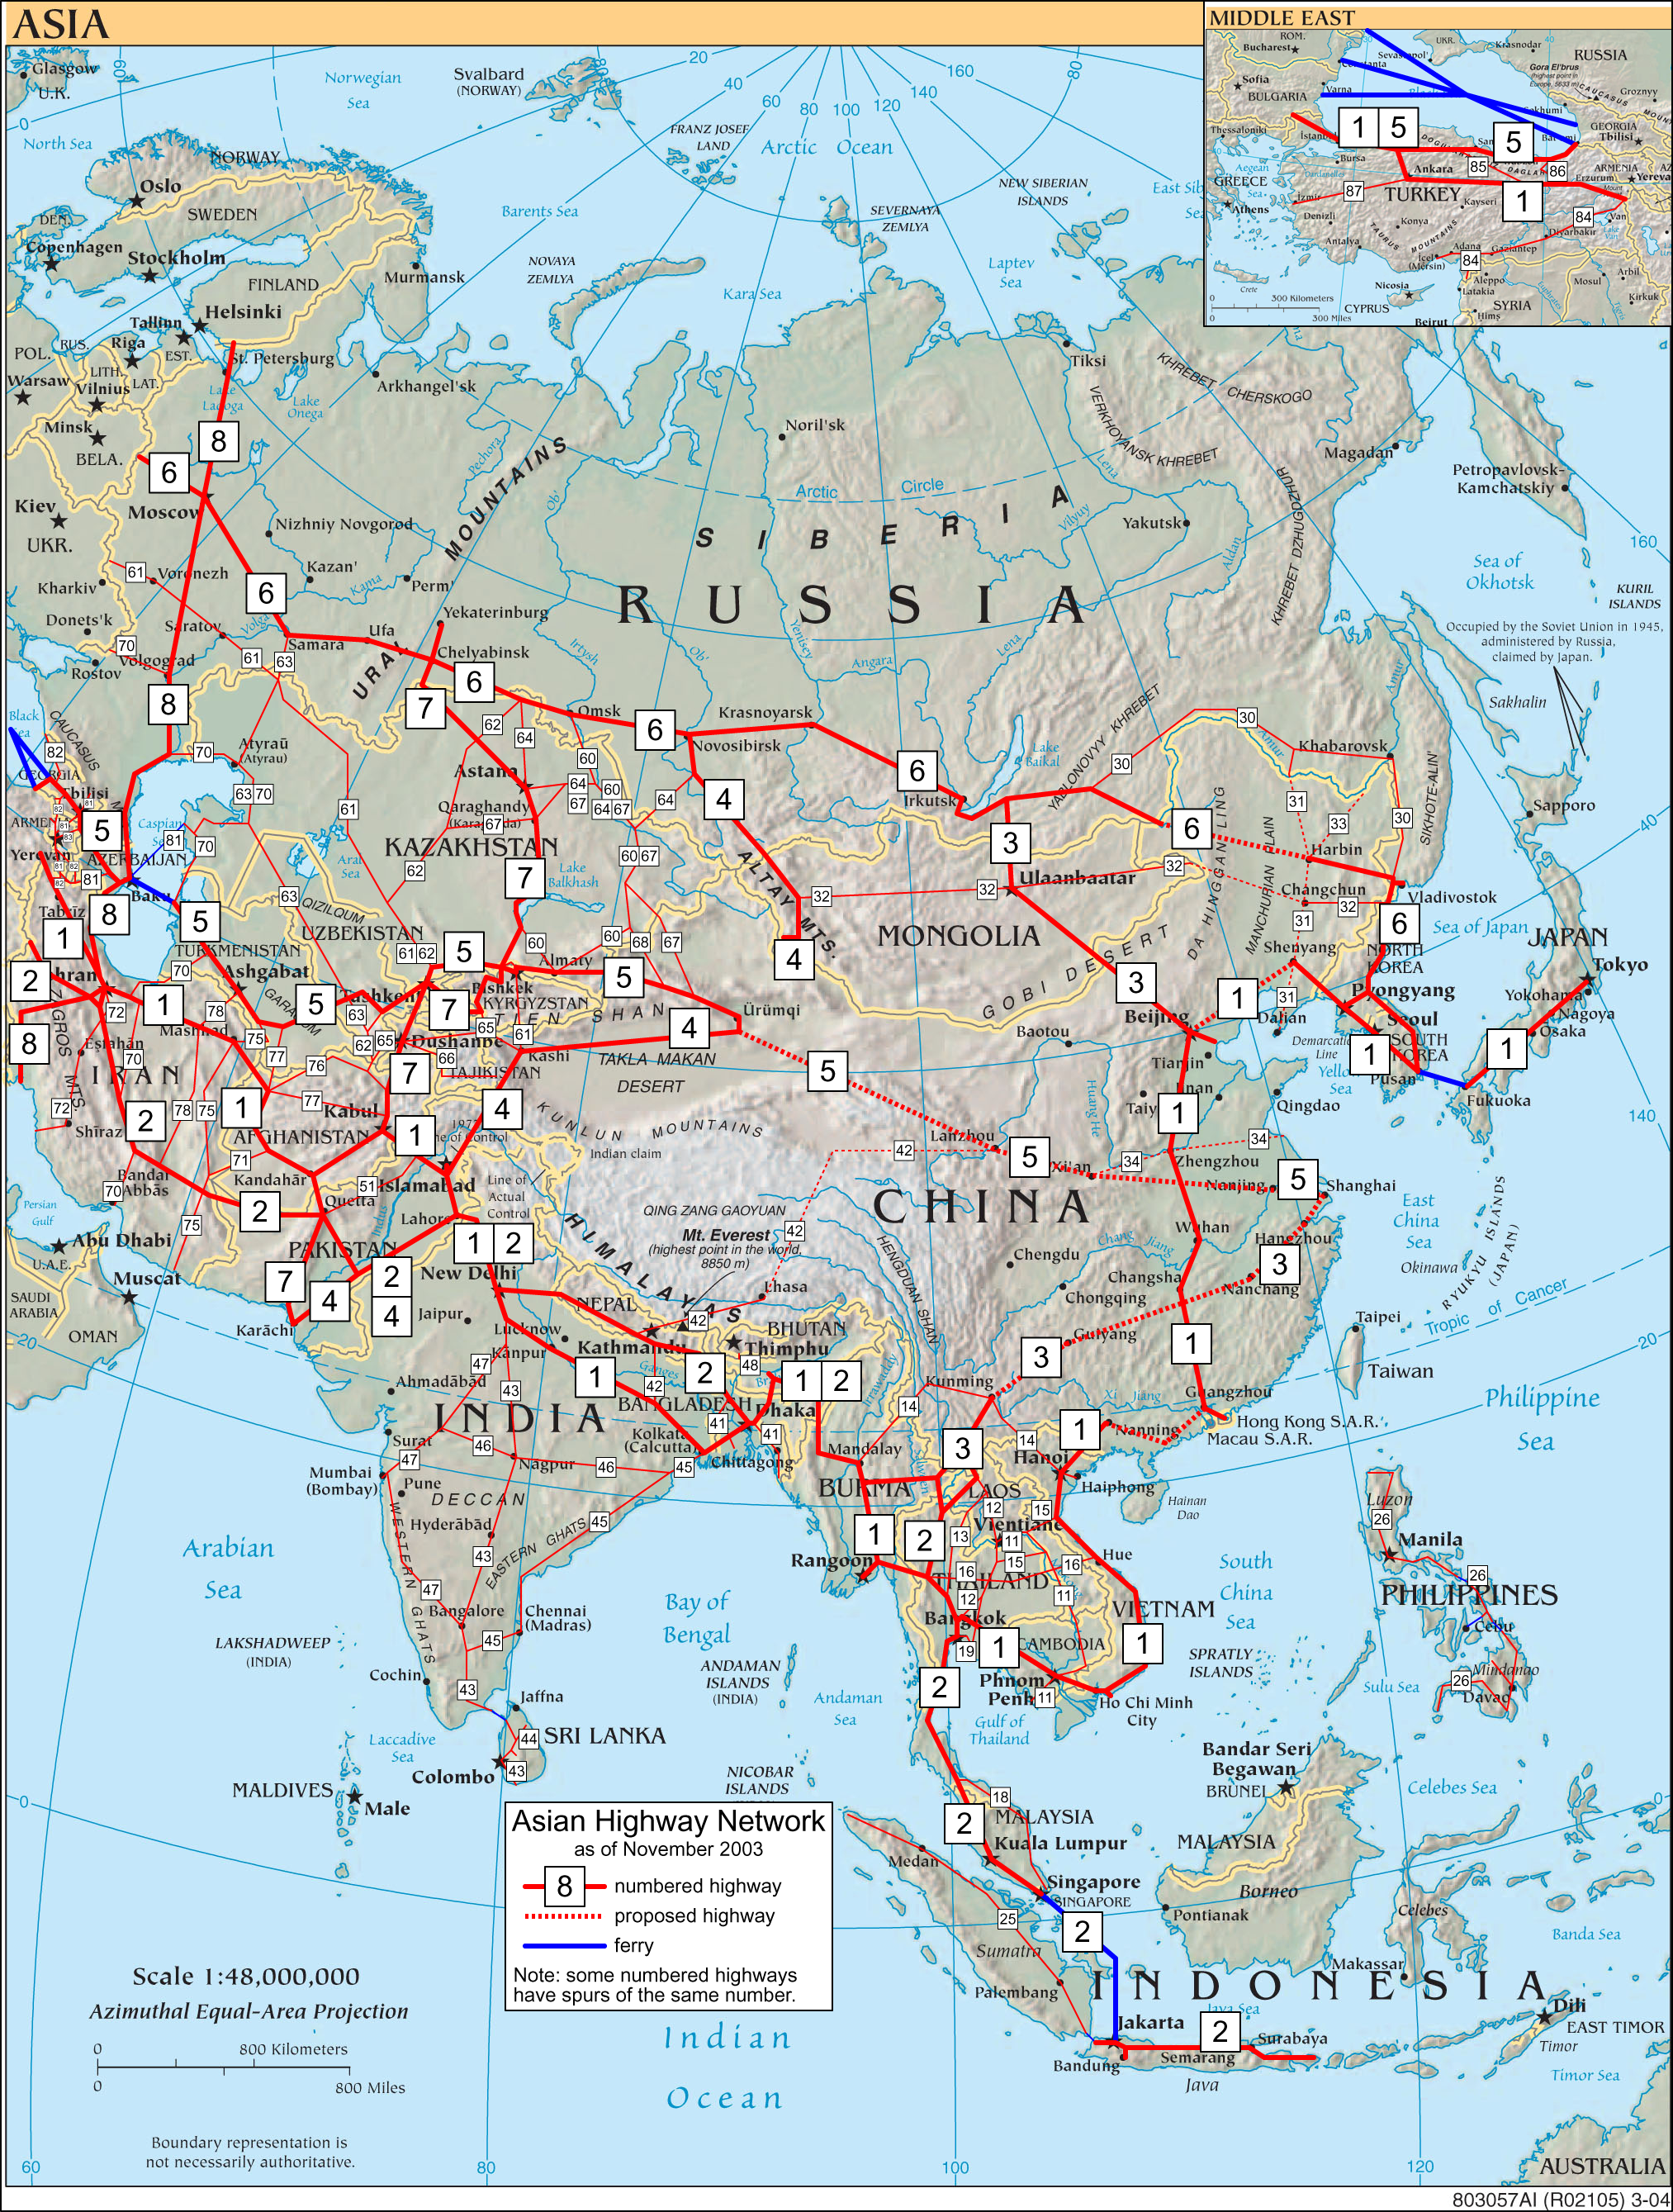 Highway Networks and Asian Politics